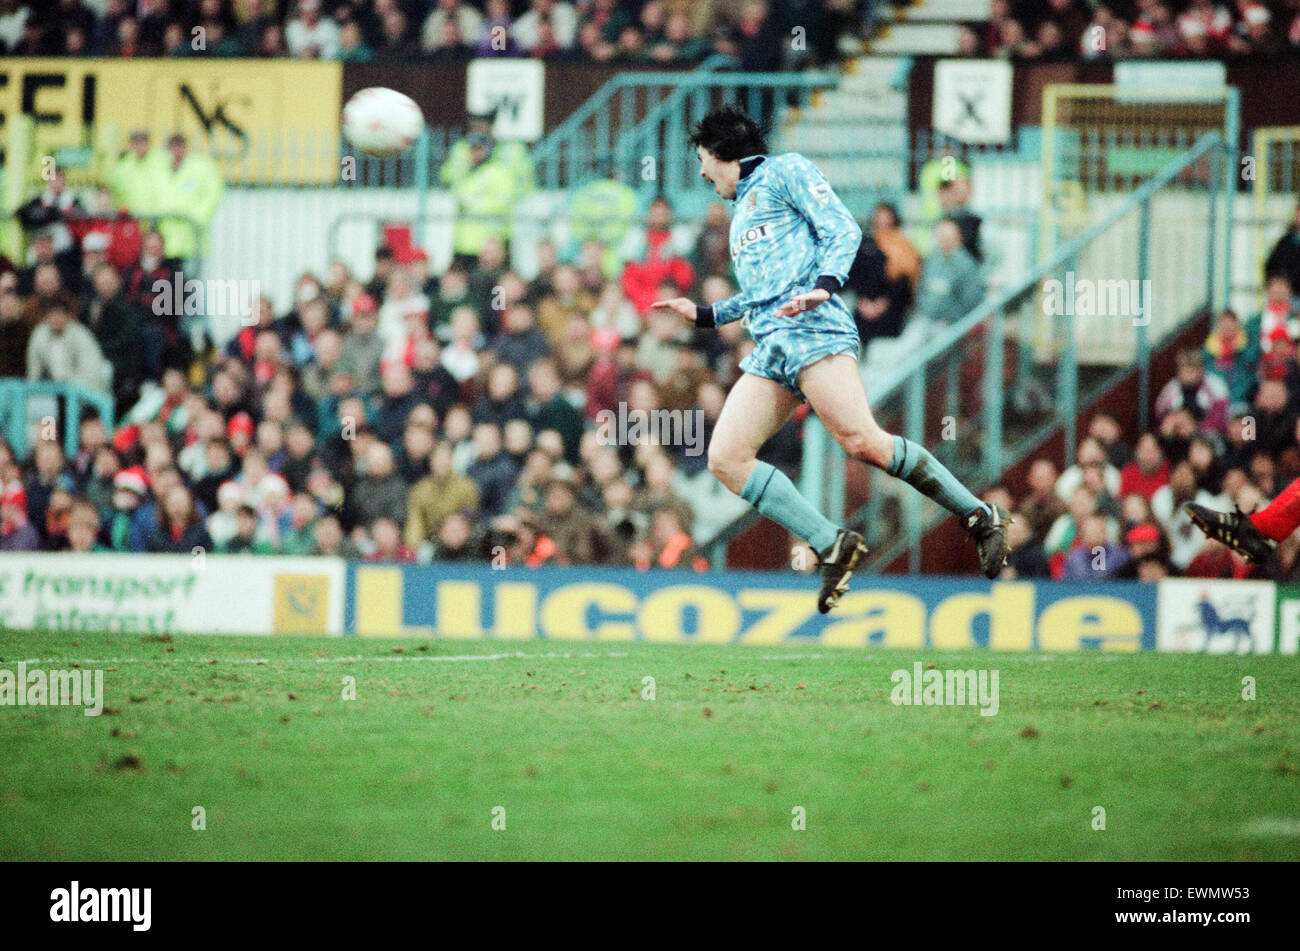 Coventry 5-1 Liverpool, Premier league match at Highfield Road, Saturday 19th December 1992. Micky Quinn. Stock Photo